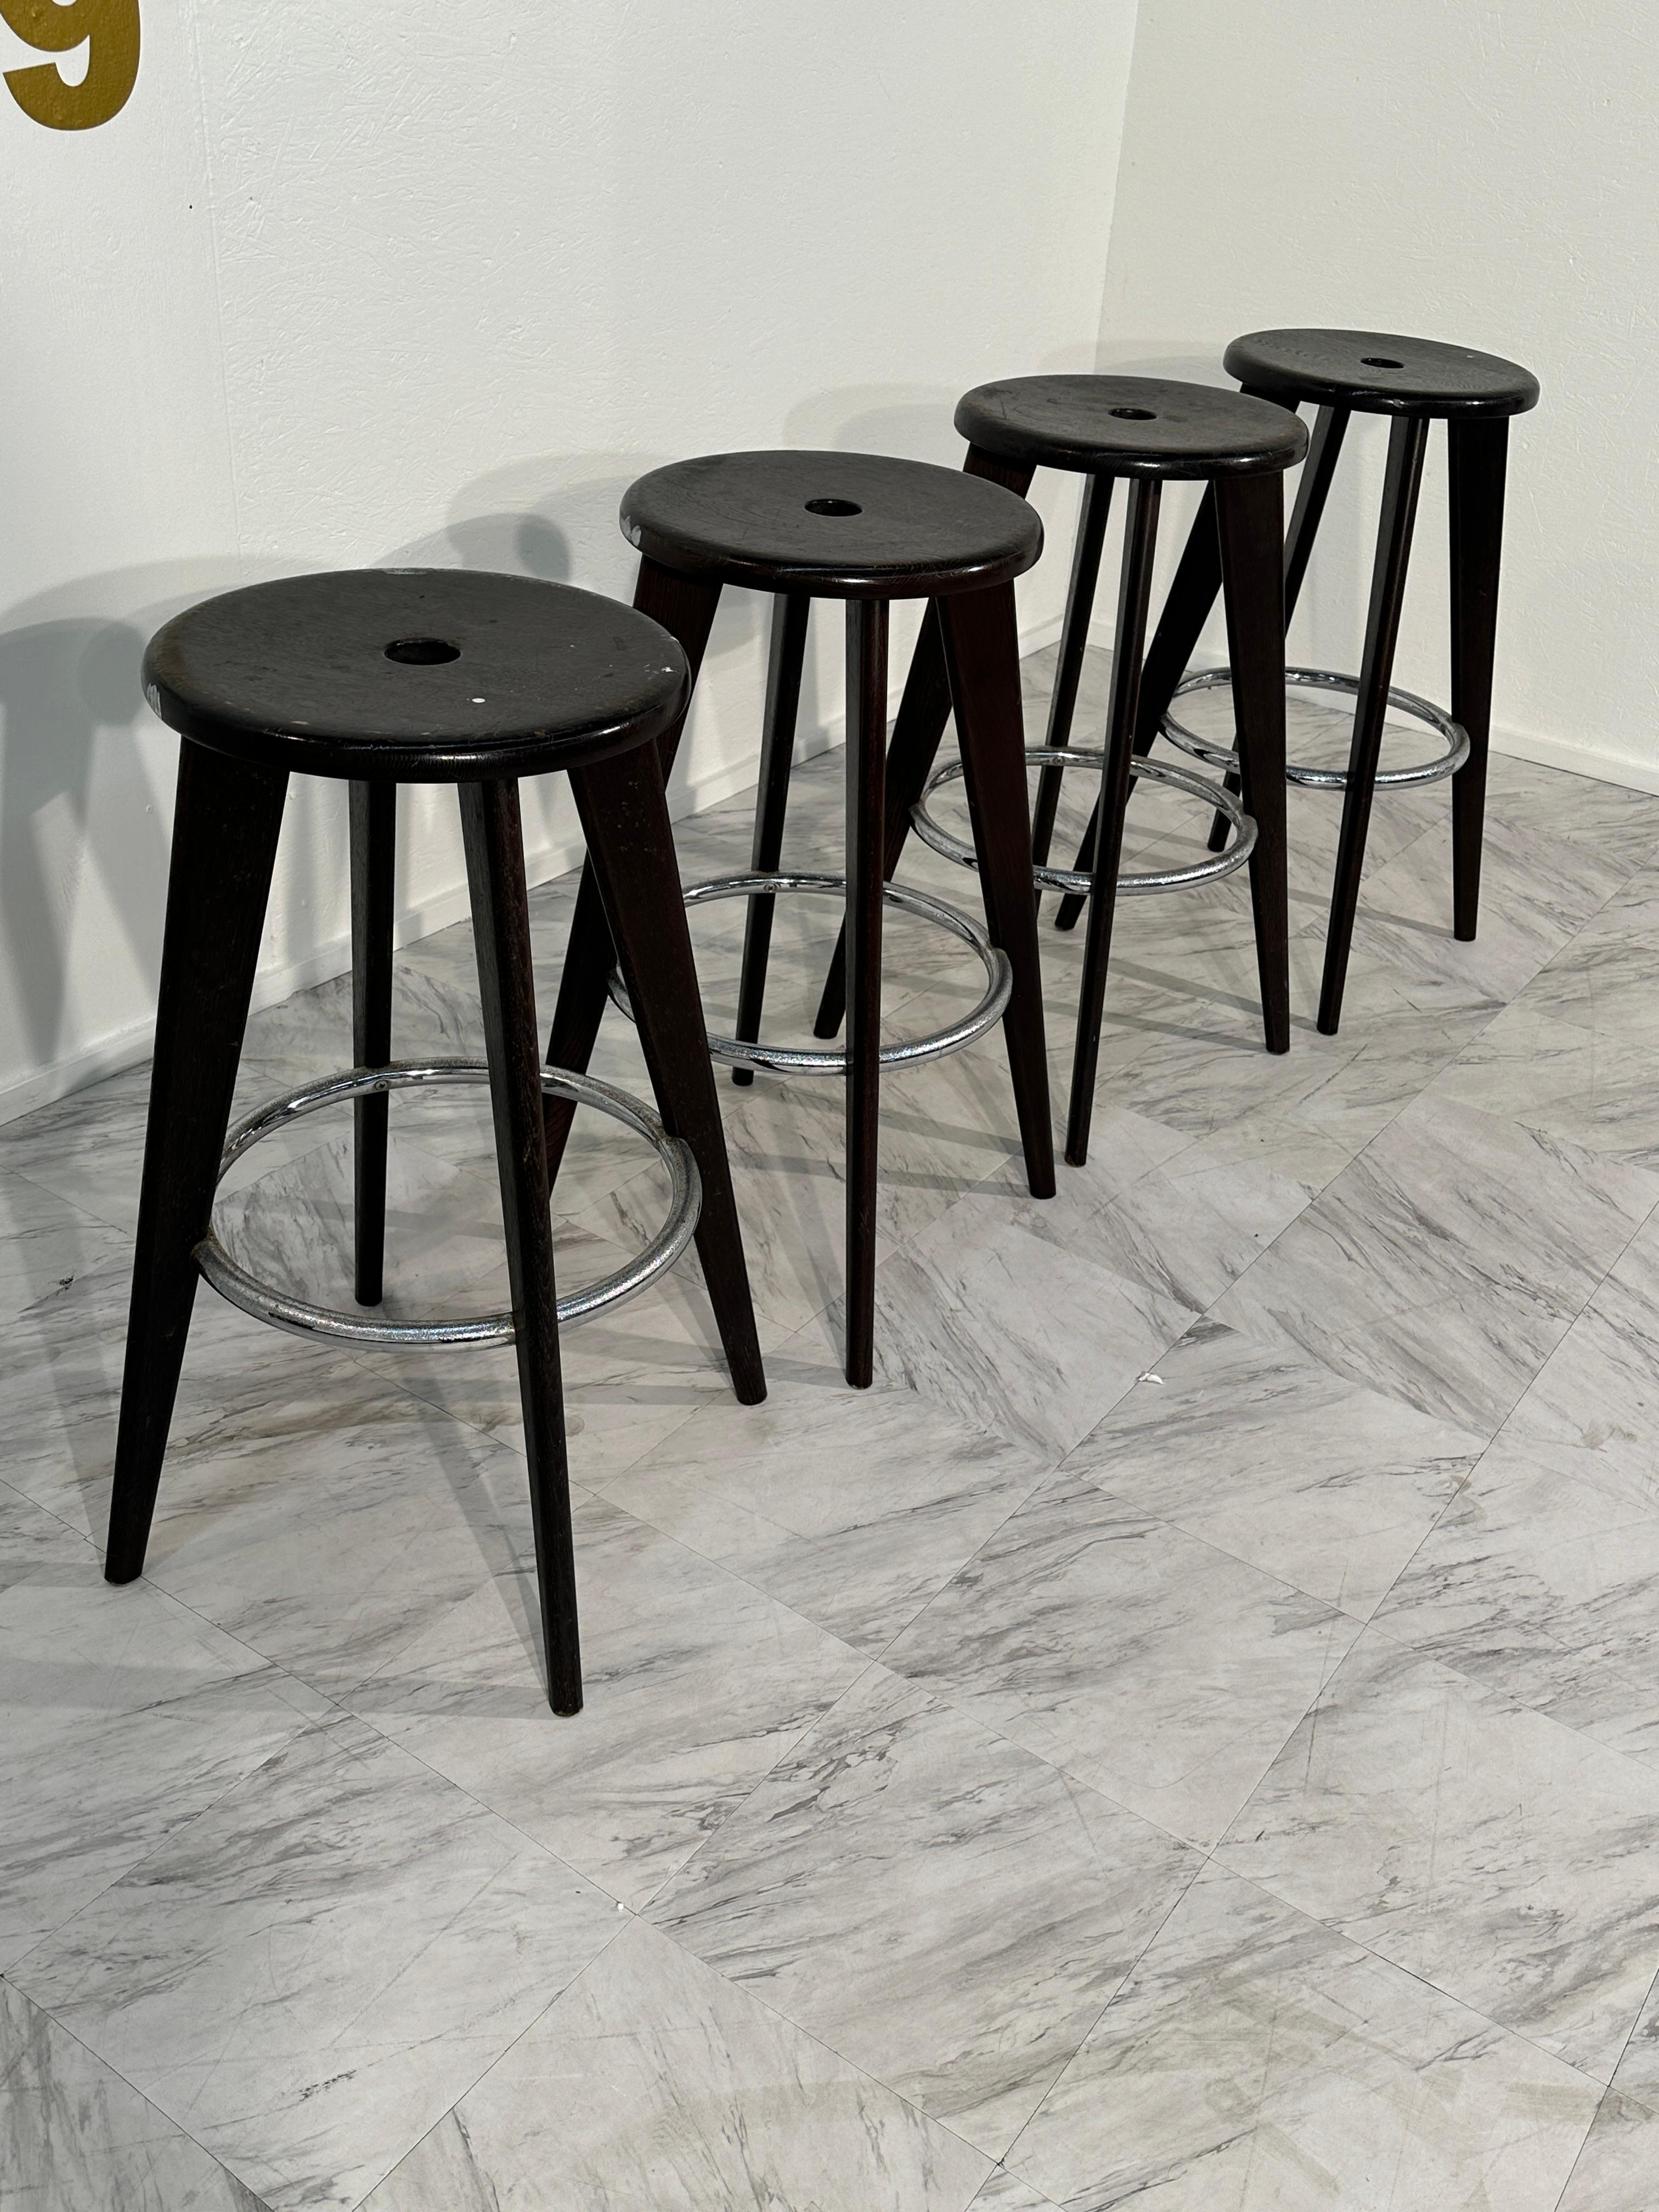 The Set of 4 Tabouret Haut Jean Prouvé Bar Stools by Vitra in Dark Oak showcases iconic mid-century design with a contemporary twist. Designed by renowned architect and designer Jean Prouvé, these stools feature a sleek and sturdy dark oak